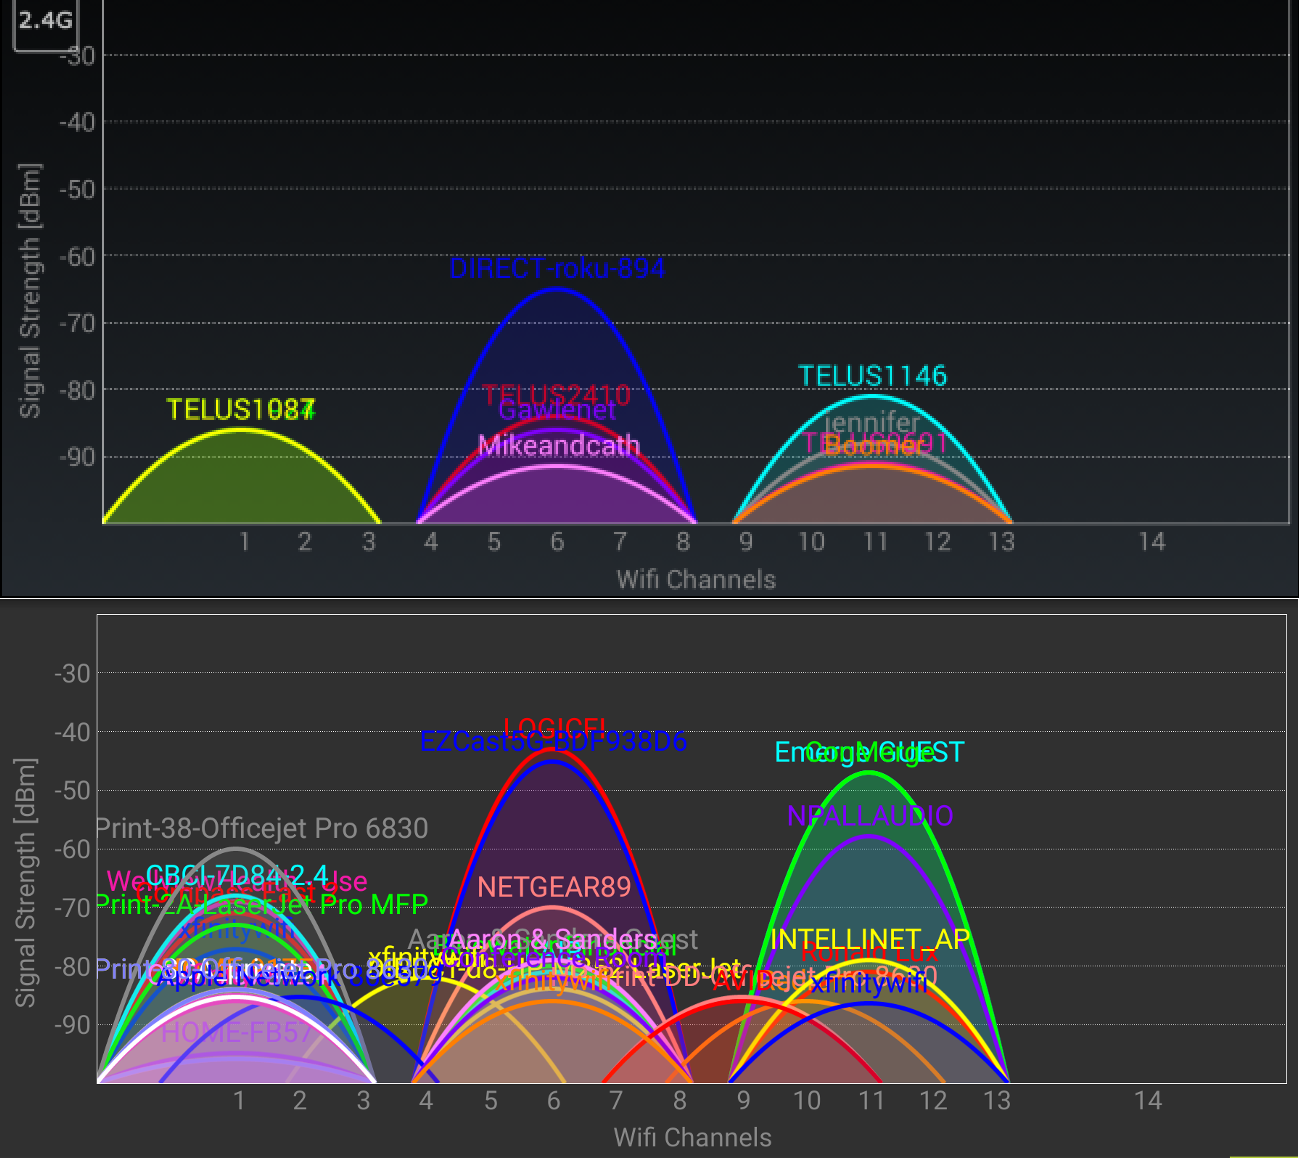 Examples of overlapping and non-overlapping 2.4Ghz WiFi channels